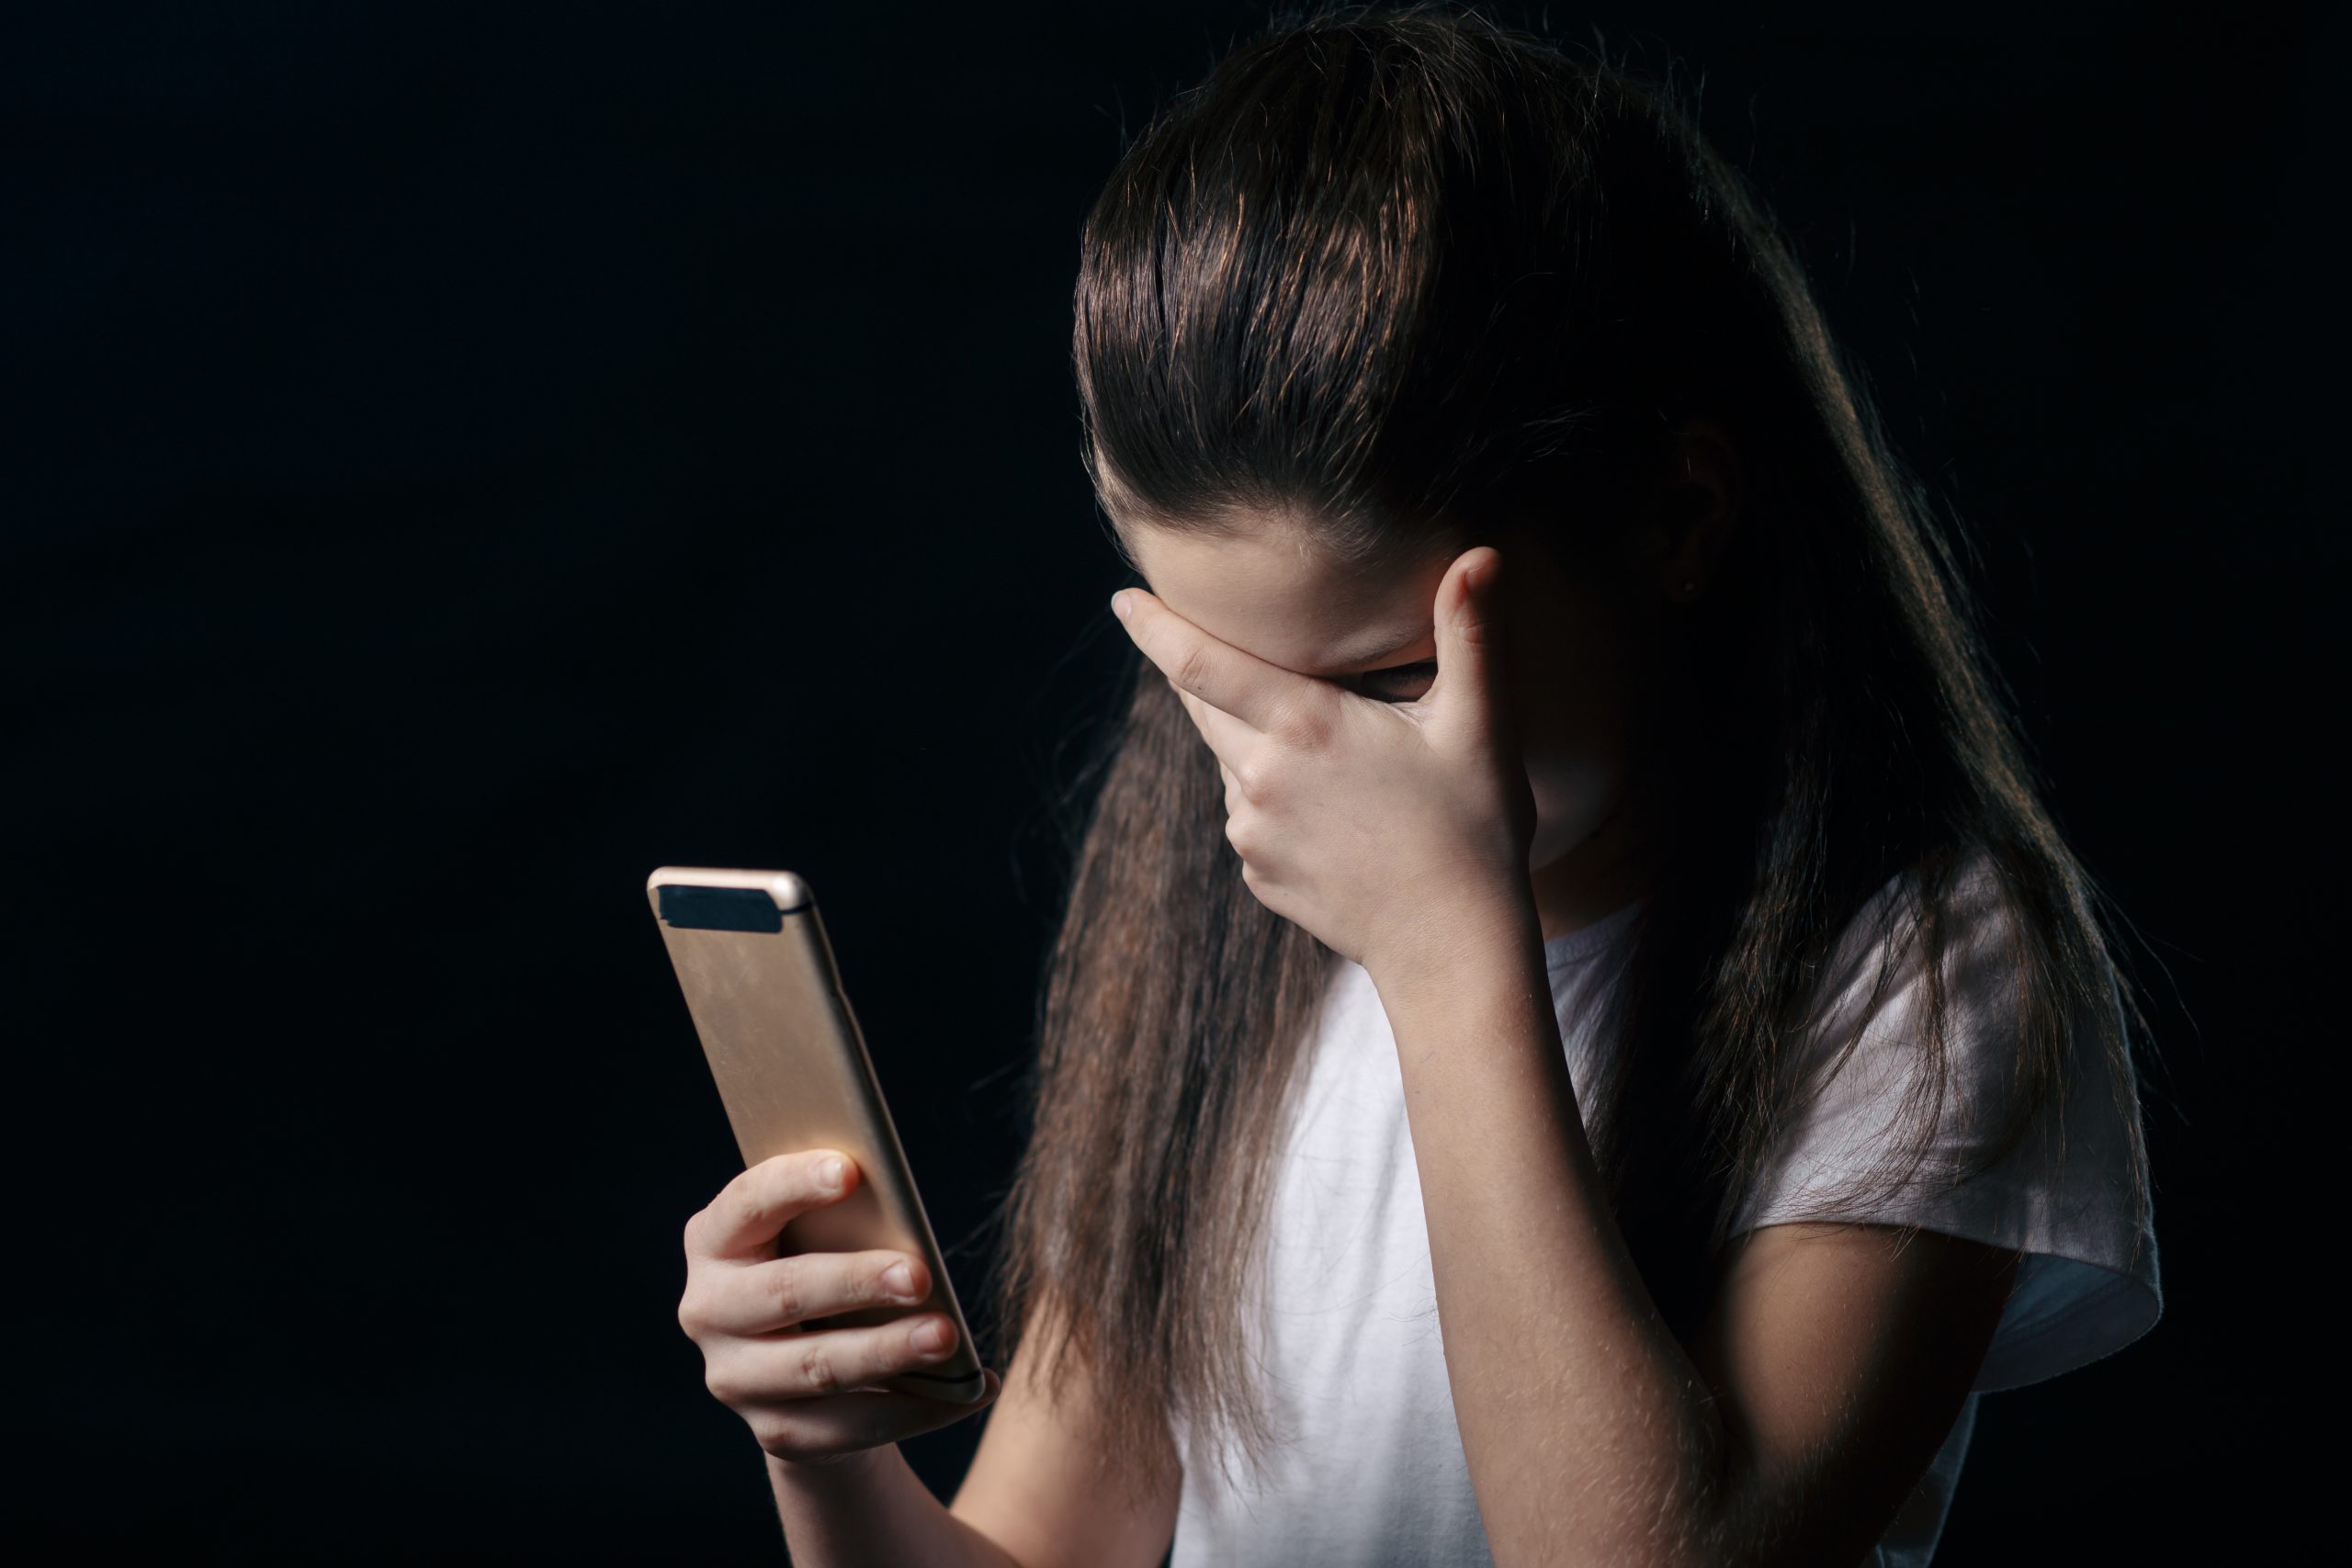 What is the difference between cyberbullying and bullying?